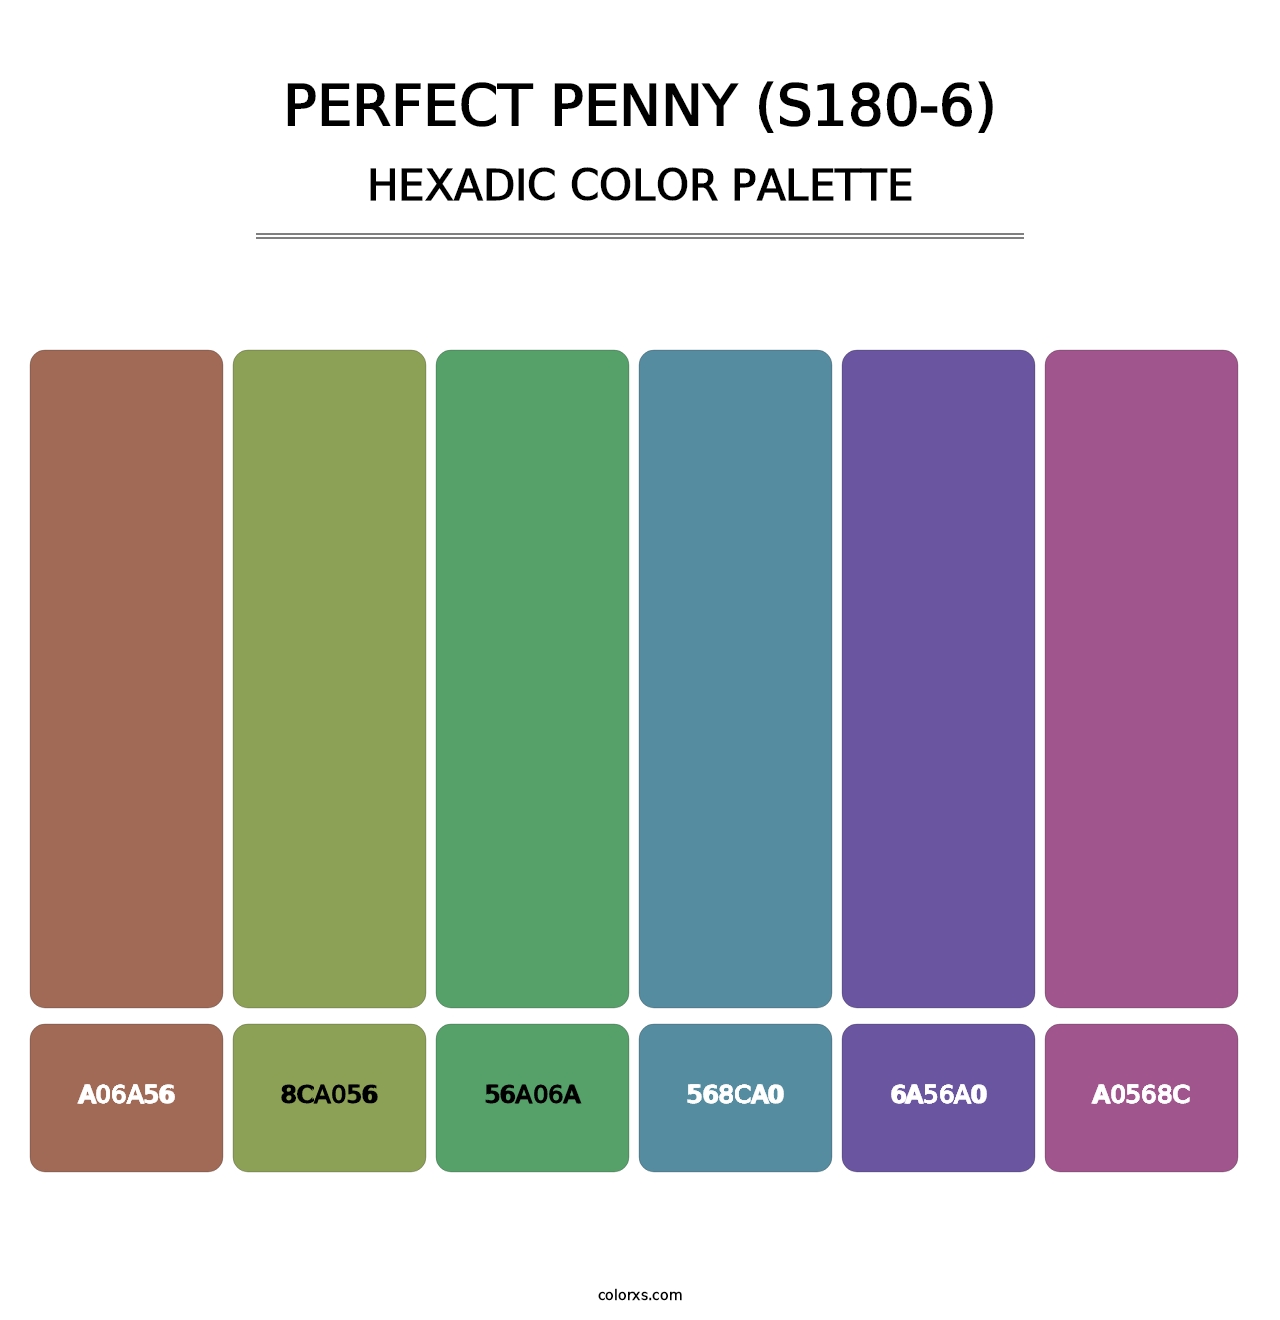 Perfect Penny (S180-6) - Hexadic Color Palette